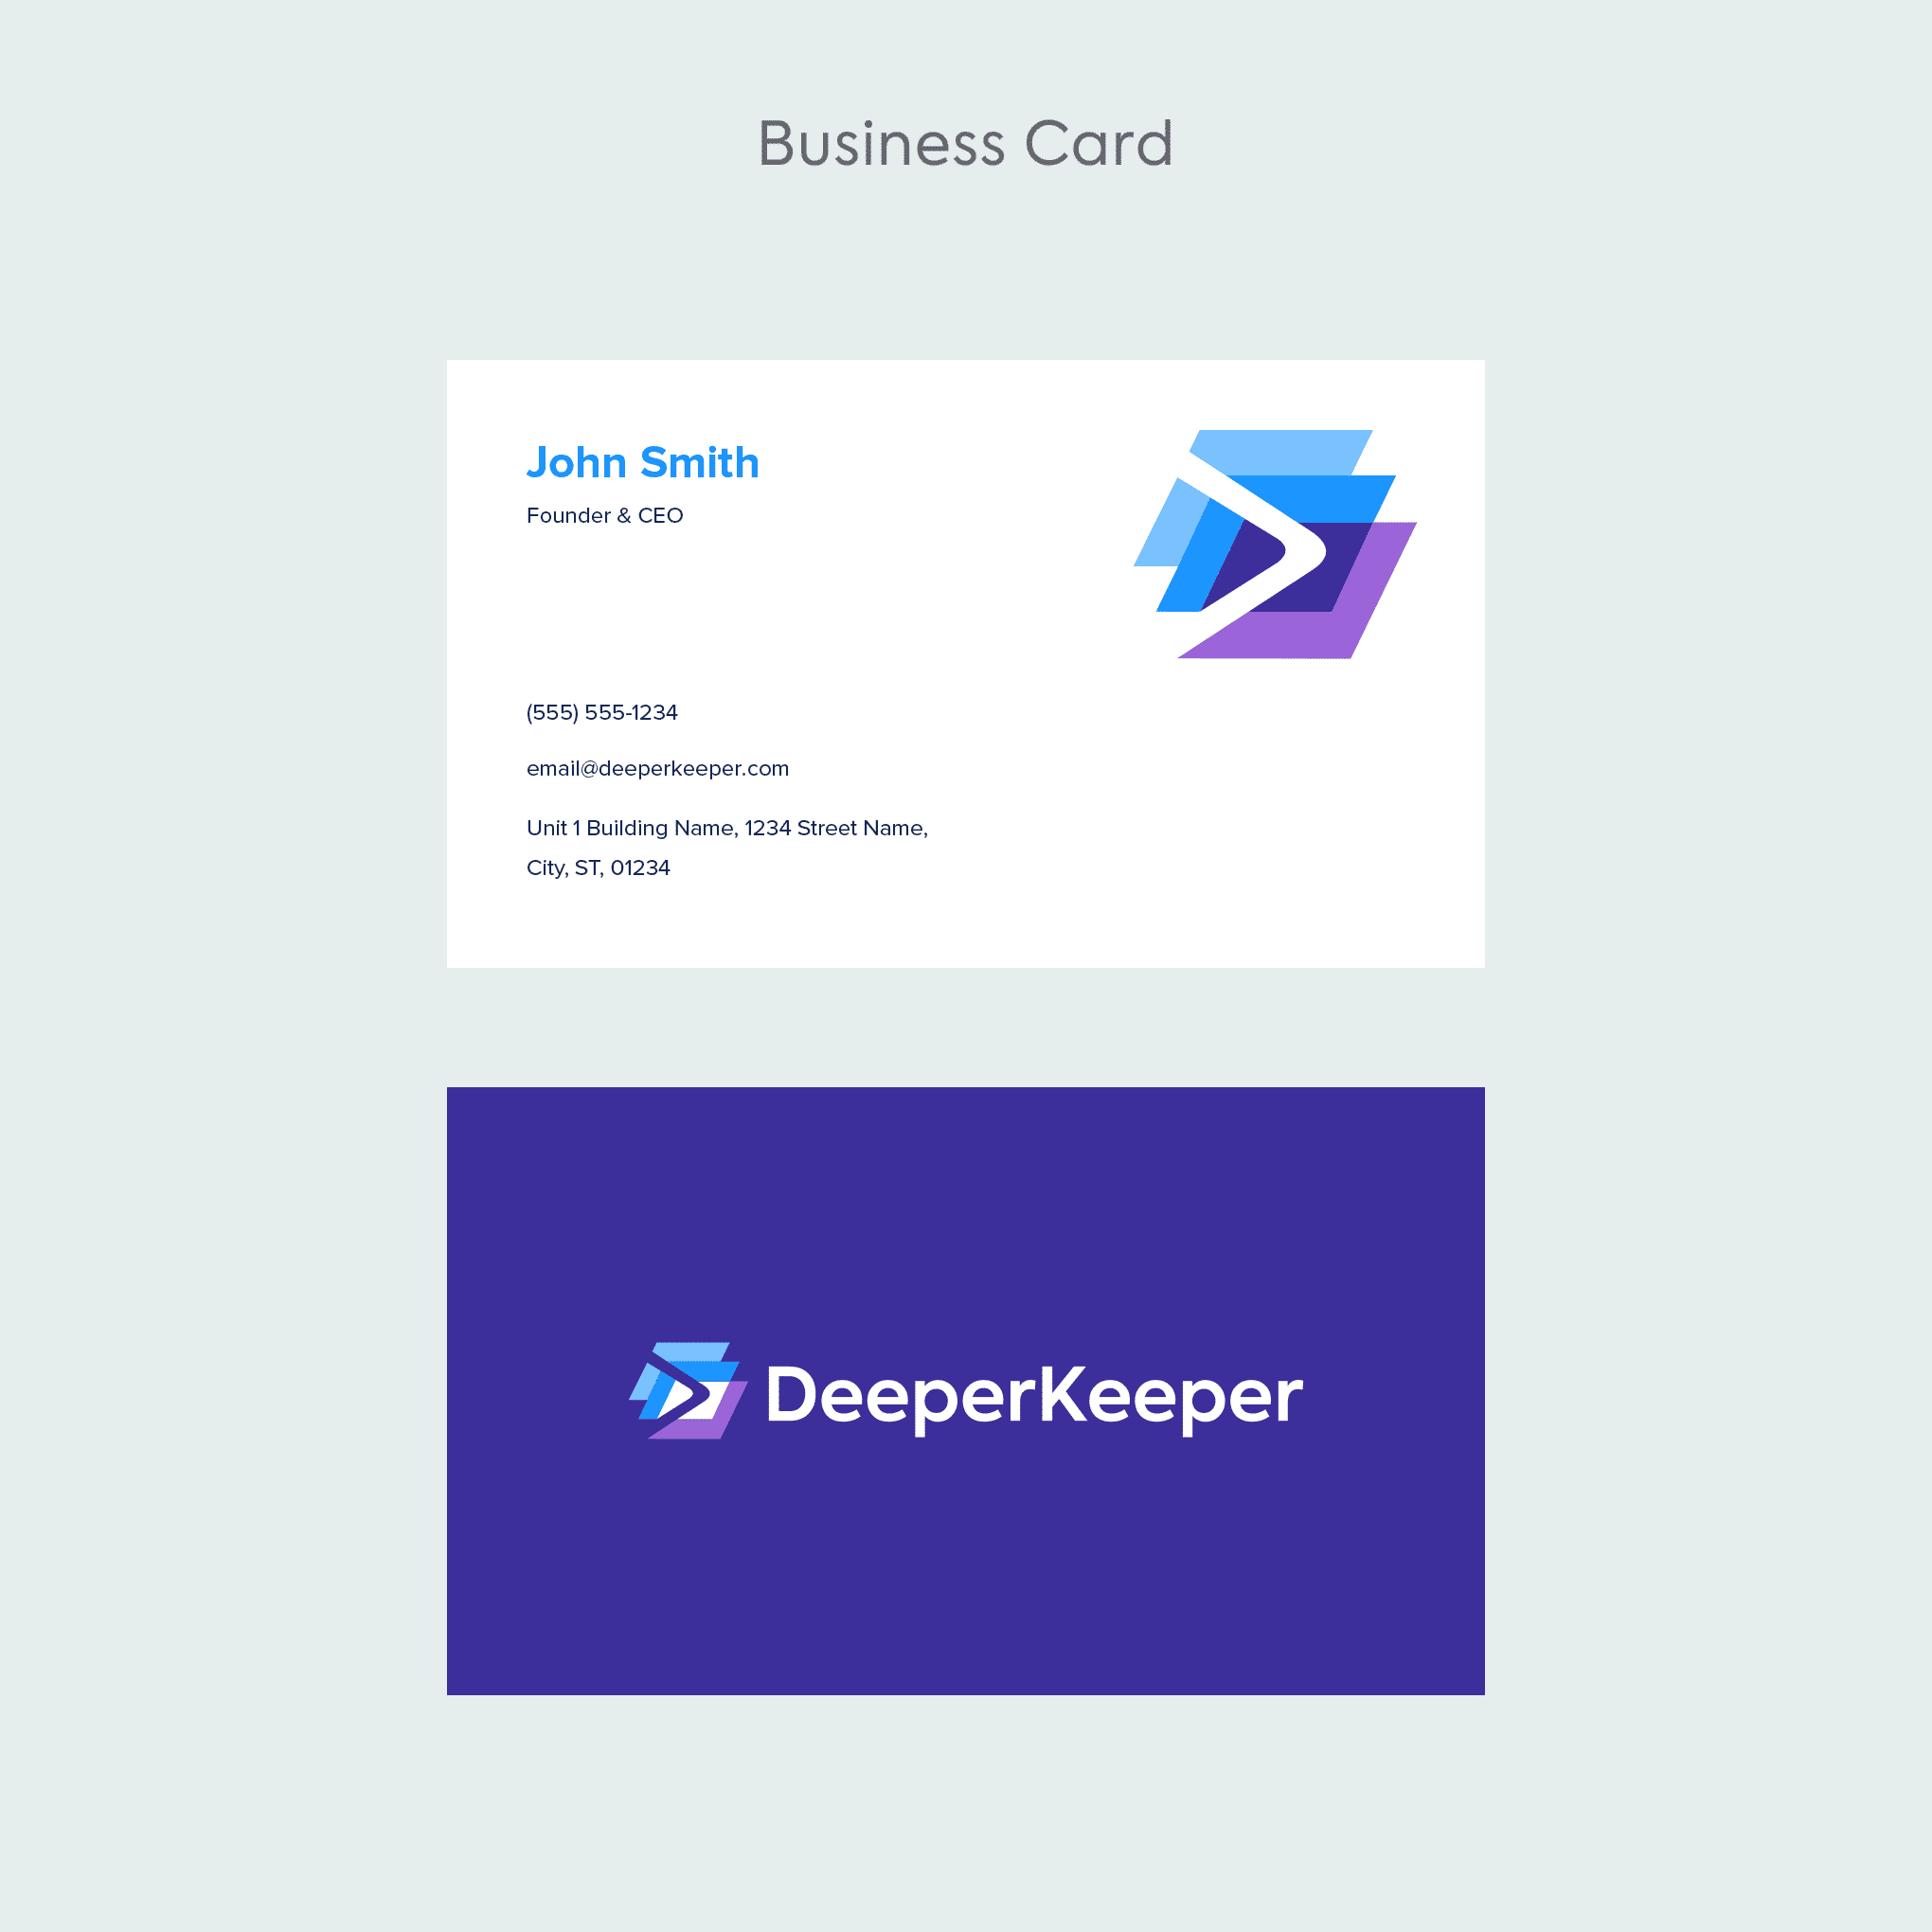 04 - Business Card Template (2)